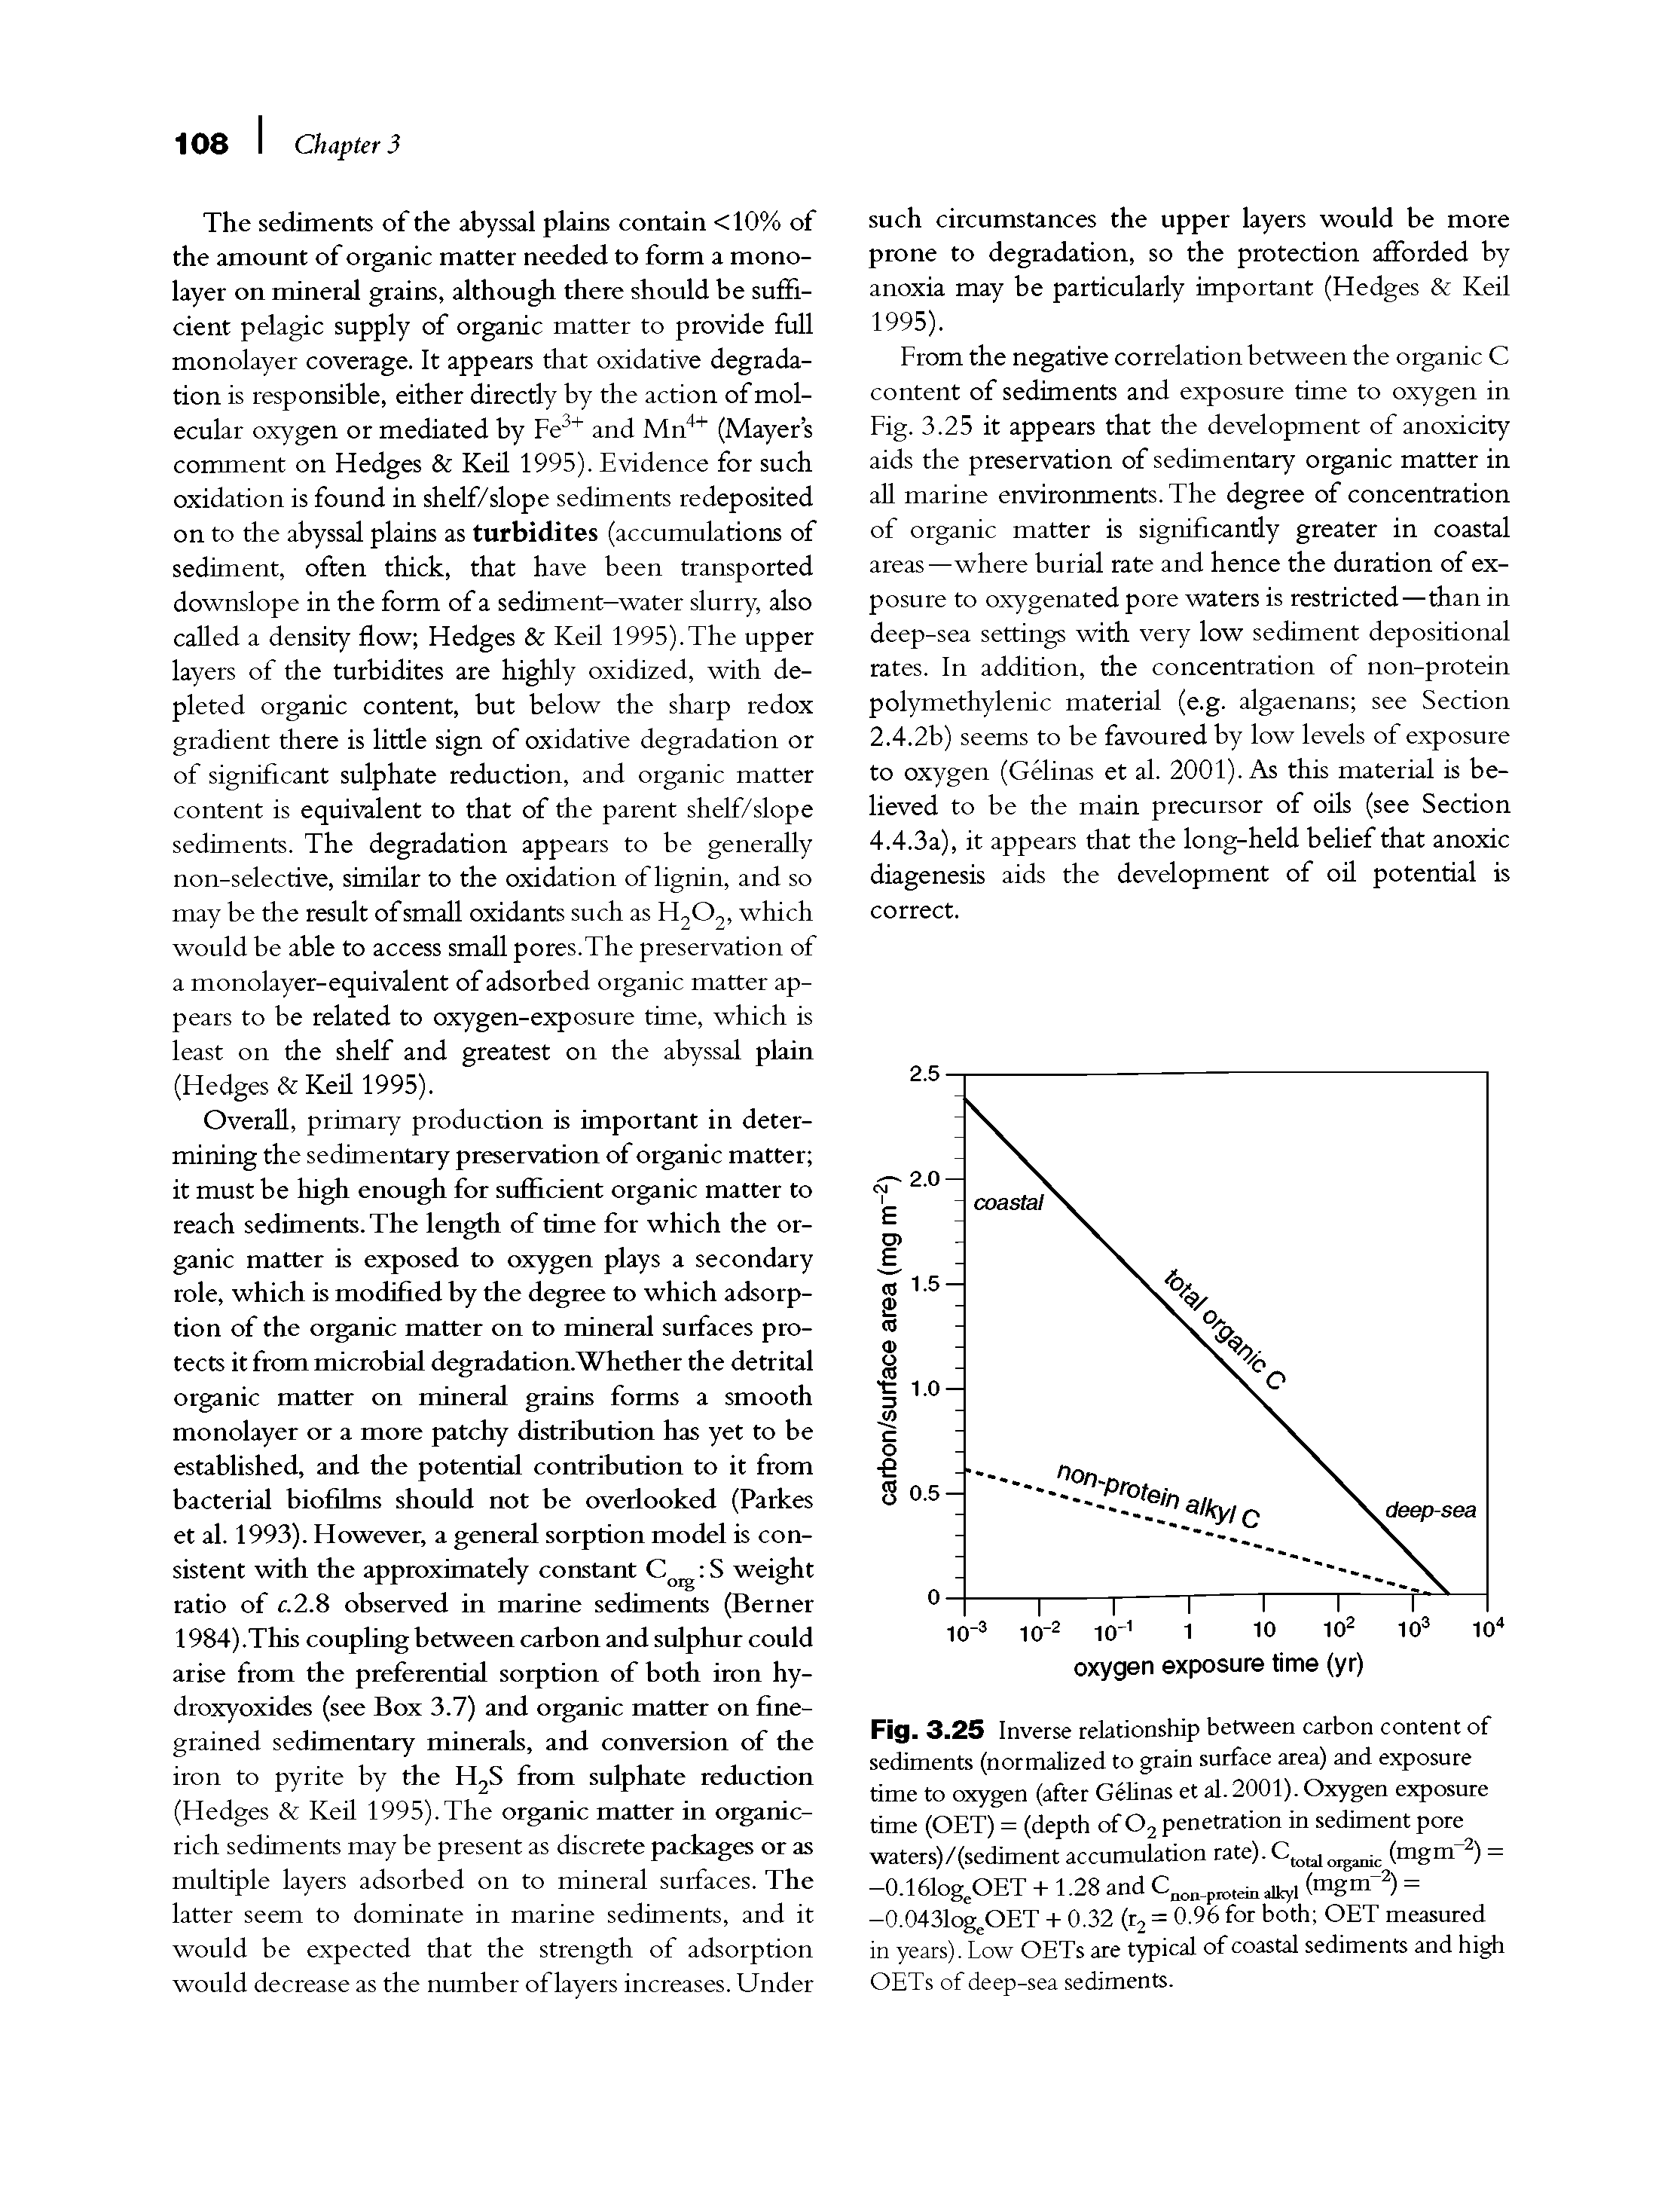 Fig. 3.25 Inverse relationship between carbon content of sediments (normalized to grain surface area) and exposure time to oxygen (after Gelinas et al. 2001). Oxygen exposure time (OET) = (depth of 02 penetration in sediment pore waters)/(sediment accumulation rate). Ctotaloiganic (mgm 2) = —0.161ogeOET + 1.28 and Cnoll protein (nignE2) = -0.0431ogeOET + 0.32 (r2 = 0.96 for both OET measured in years). Low OETs are typical of coastal sediments and high OETs of deep-sea sediments.